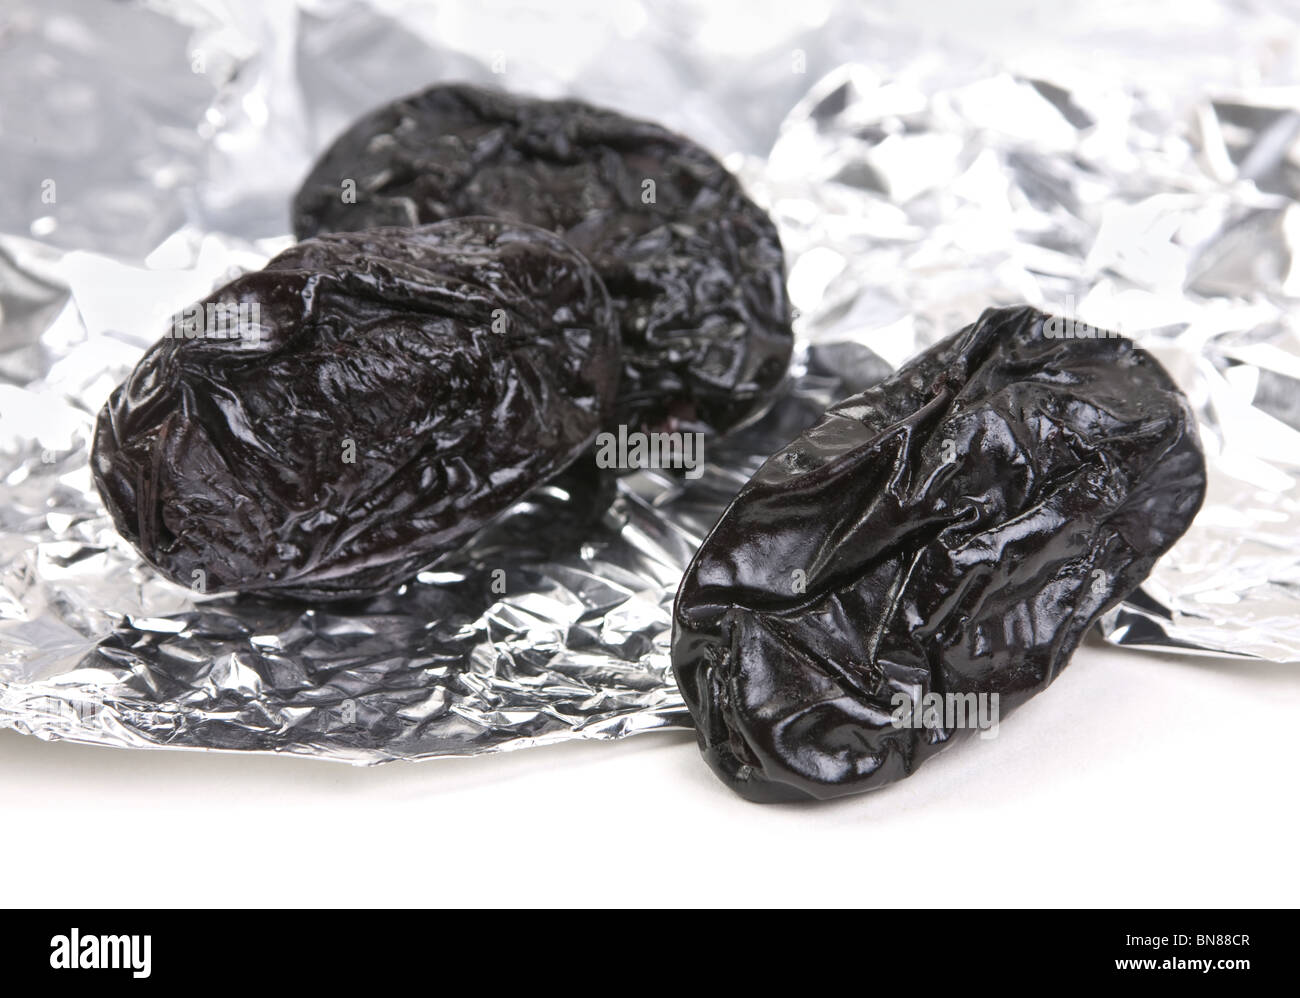 Dried fruit prune closeup on foil background Stock Photo